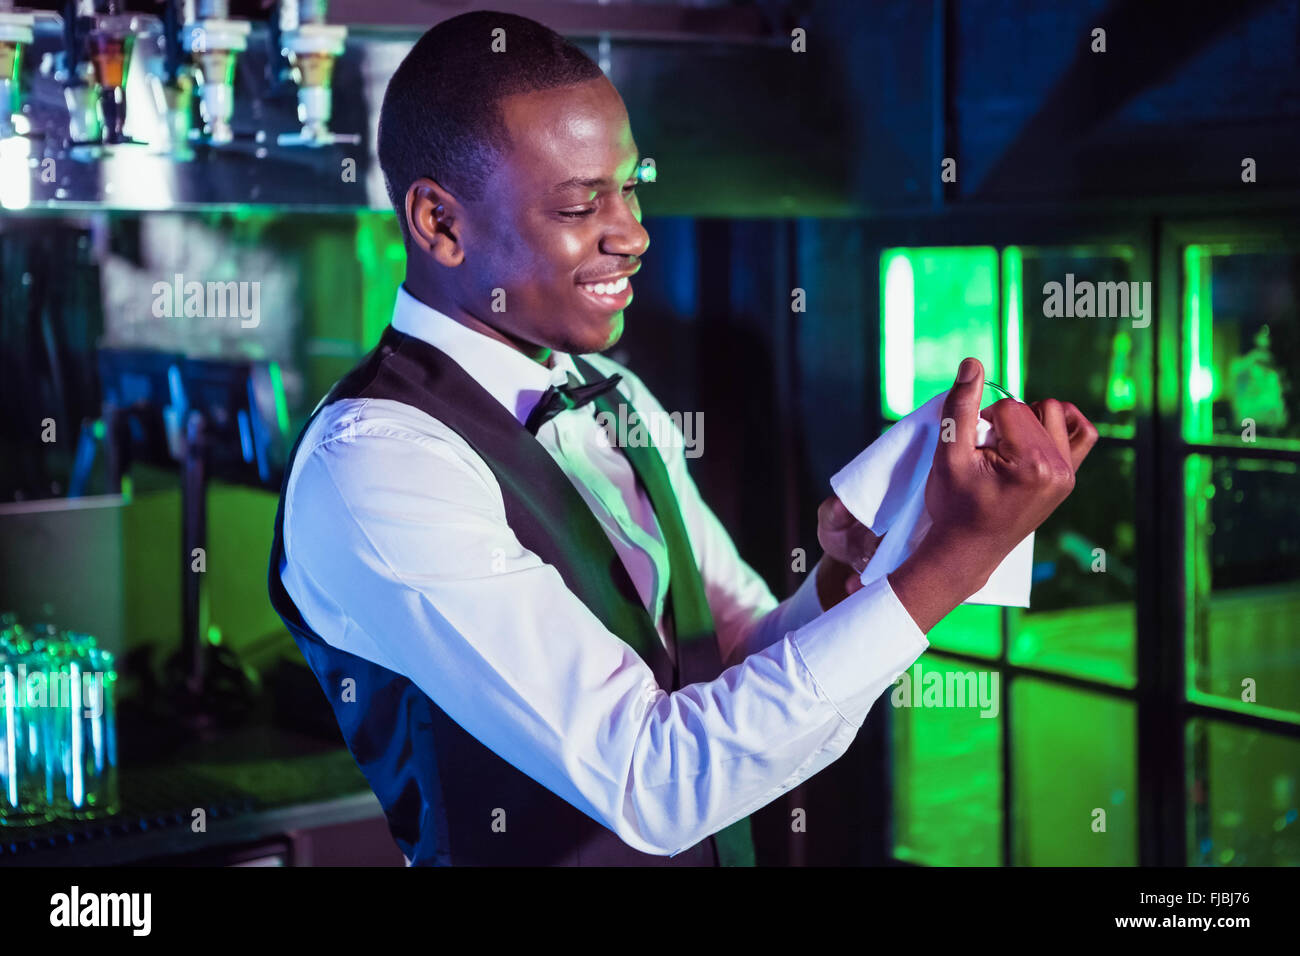 Smiling male bartender wiping a glass and looking away. Barista in